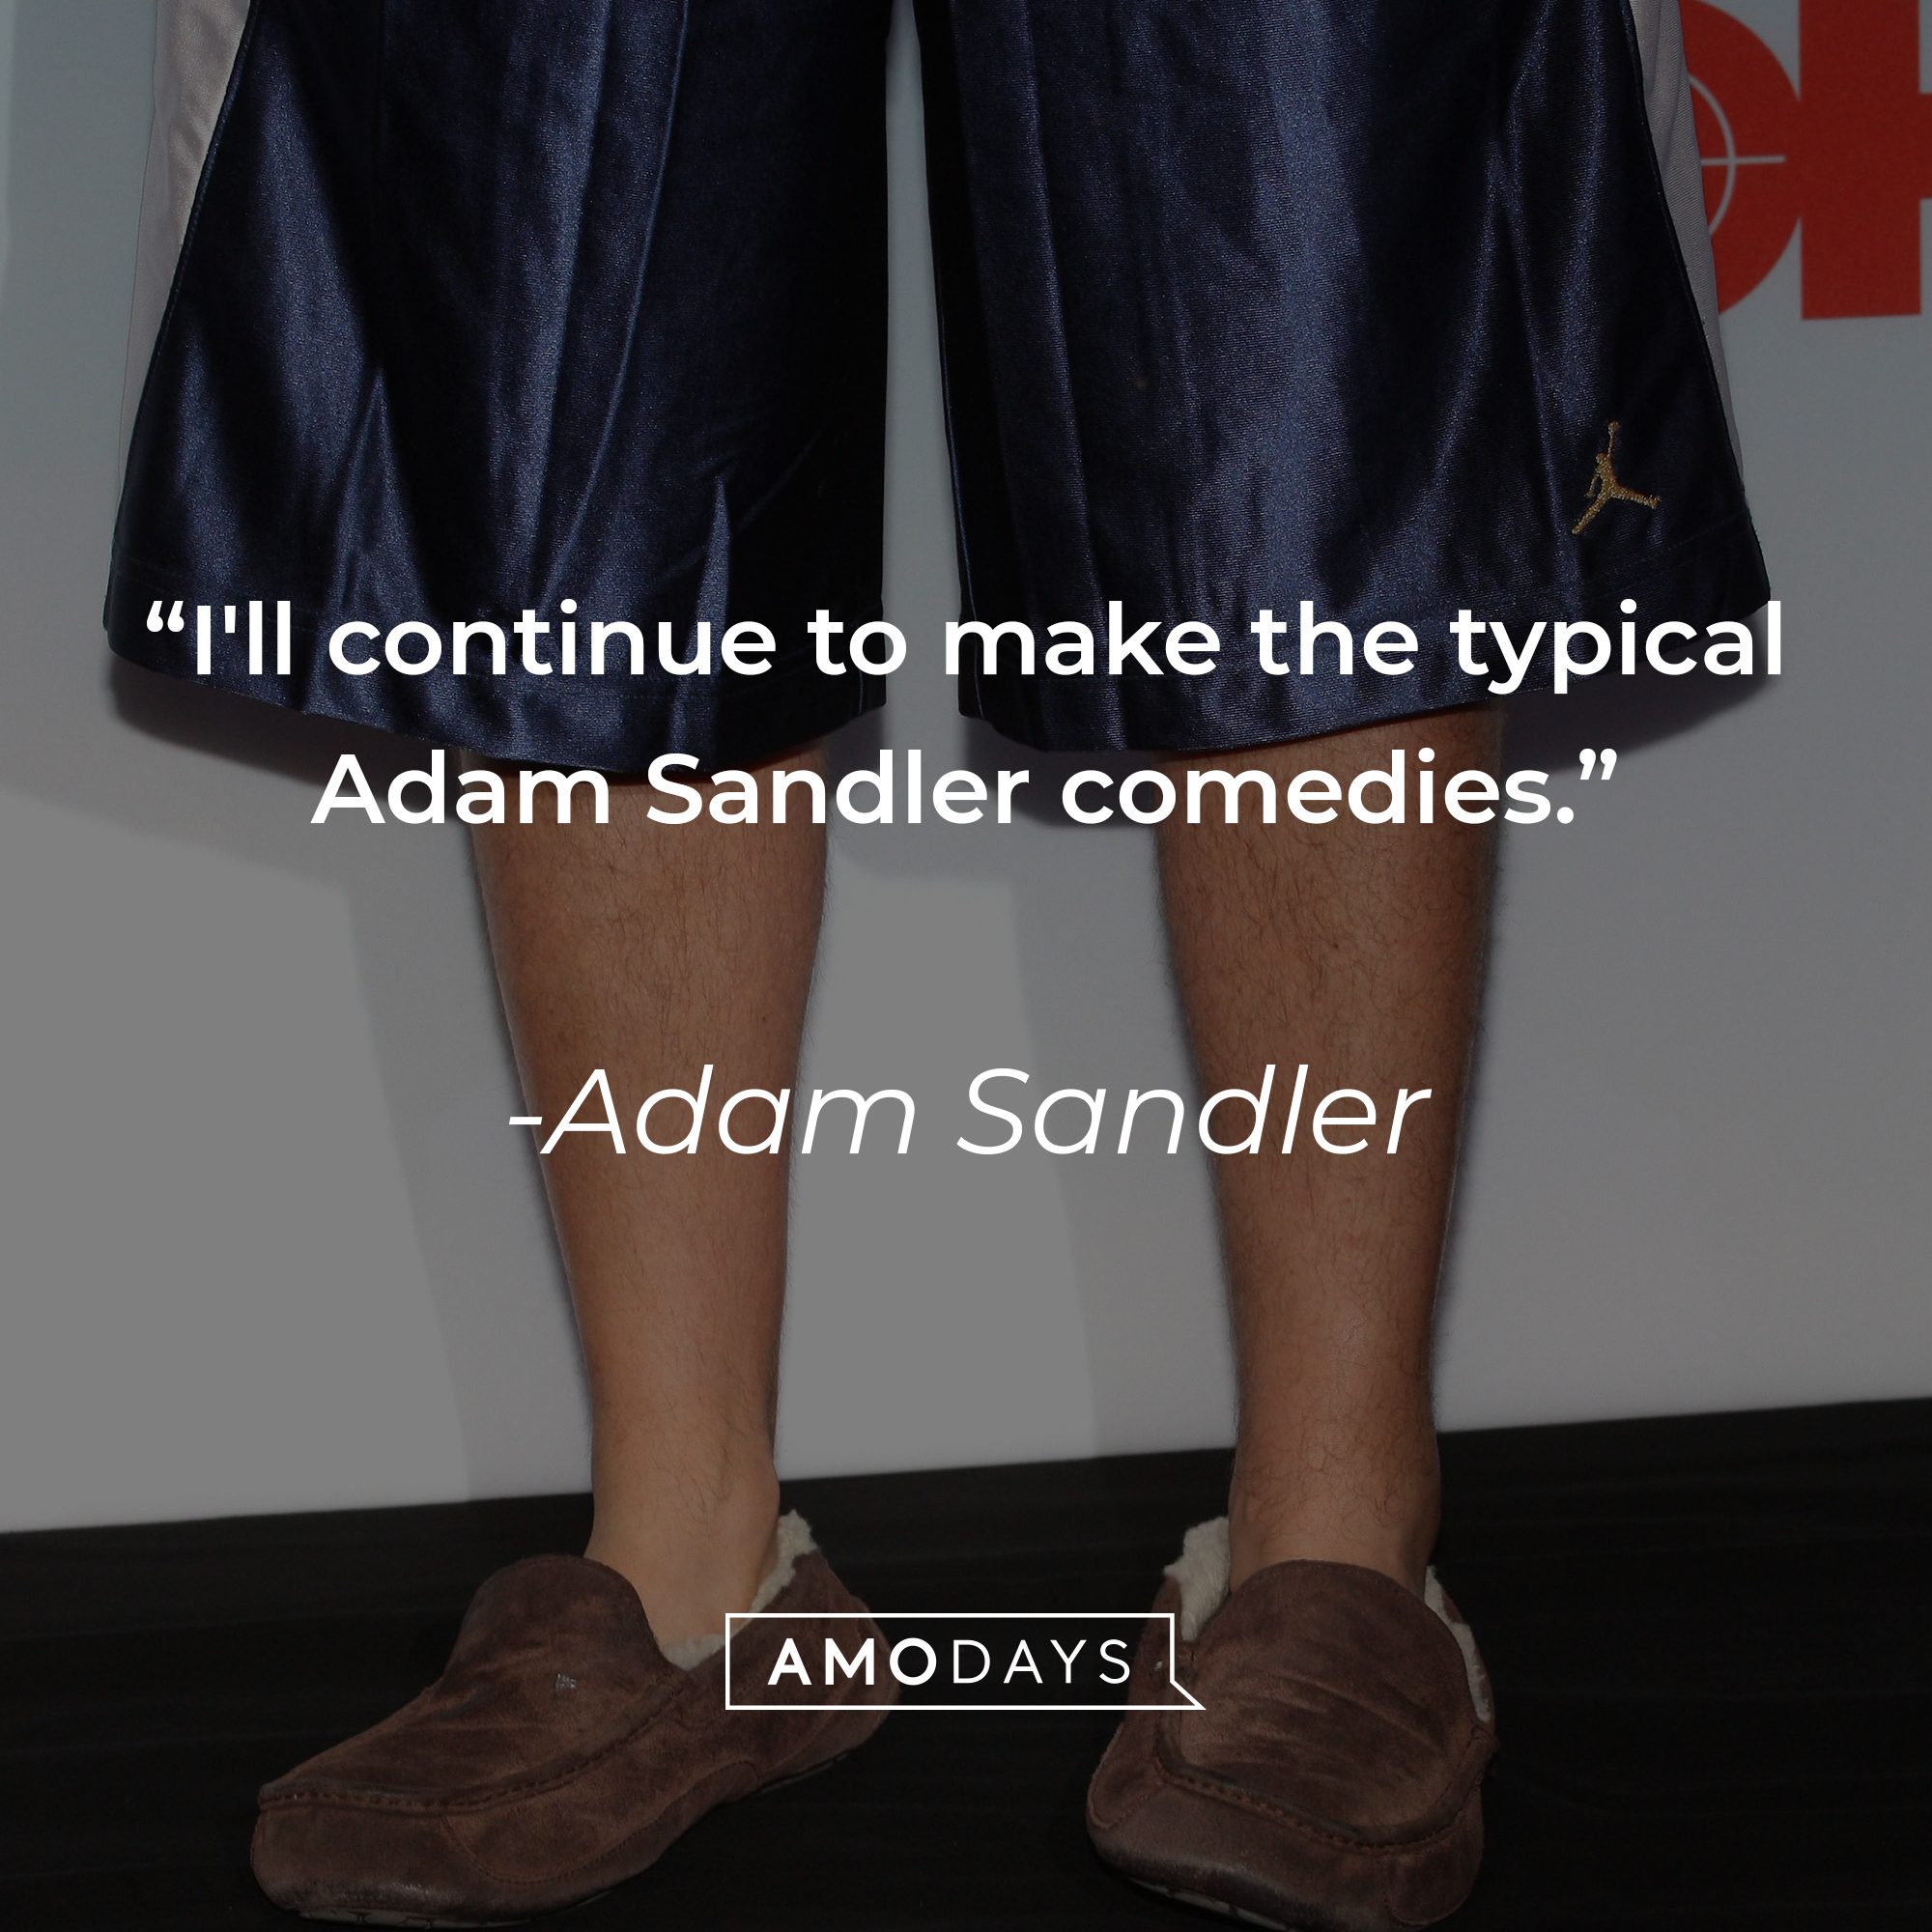 Adam Sandler's quote: "I'll continue to make the typical Adam Sandler comedies." | Source: Getty Images